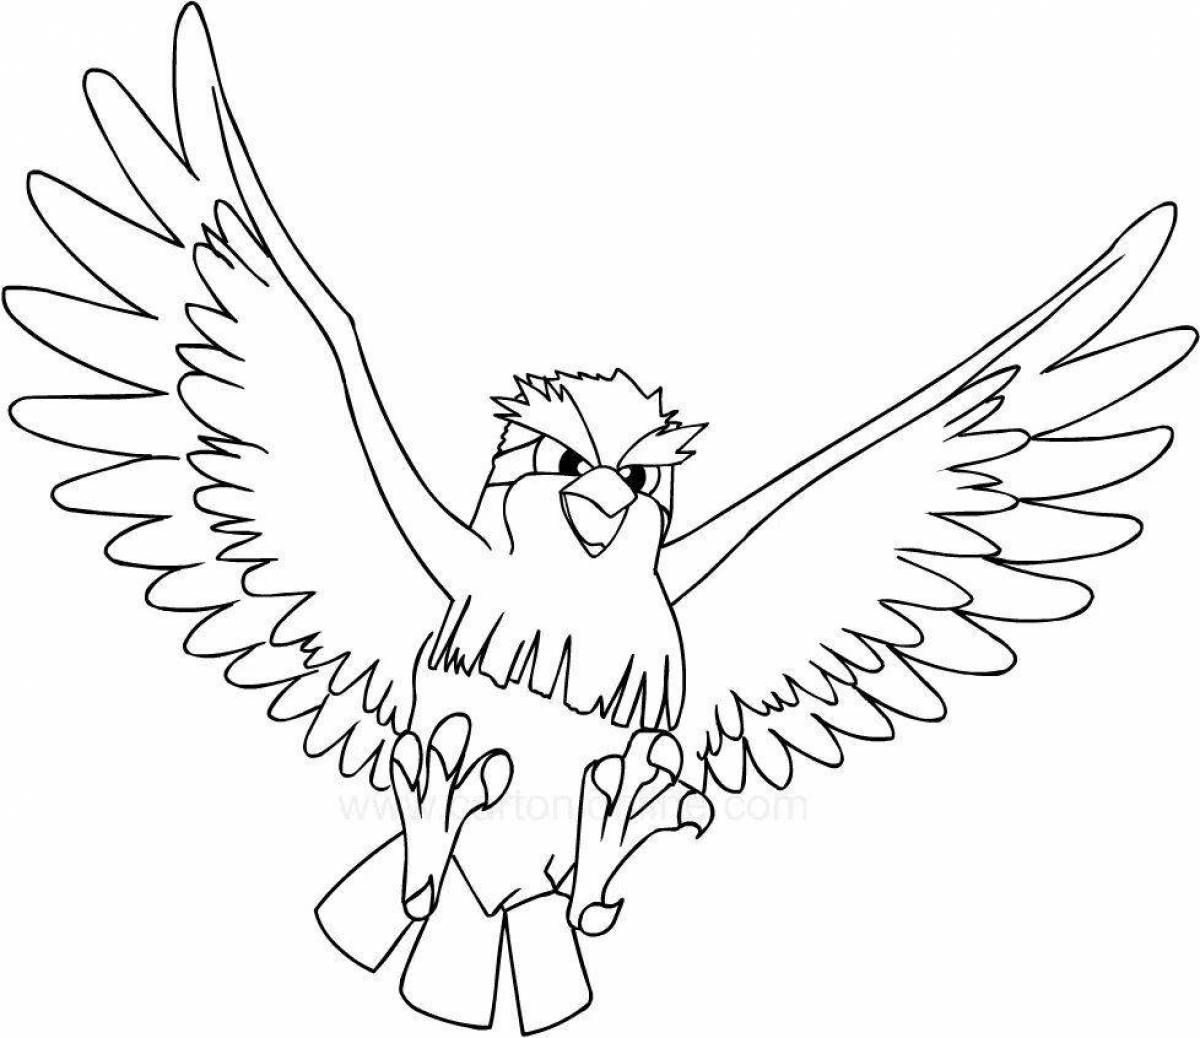 Colorful coloring page pj